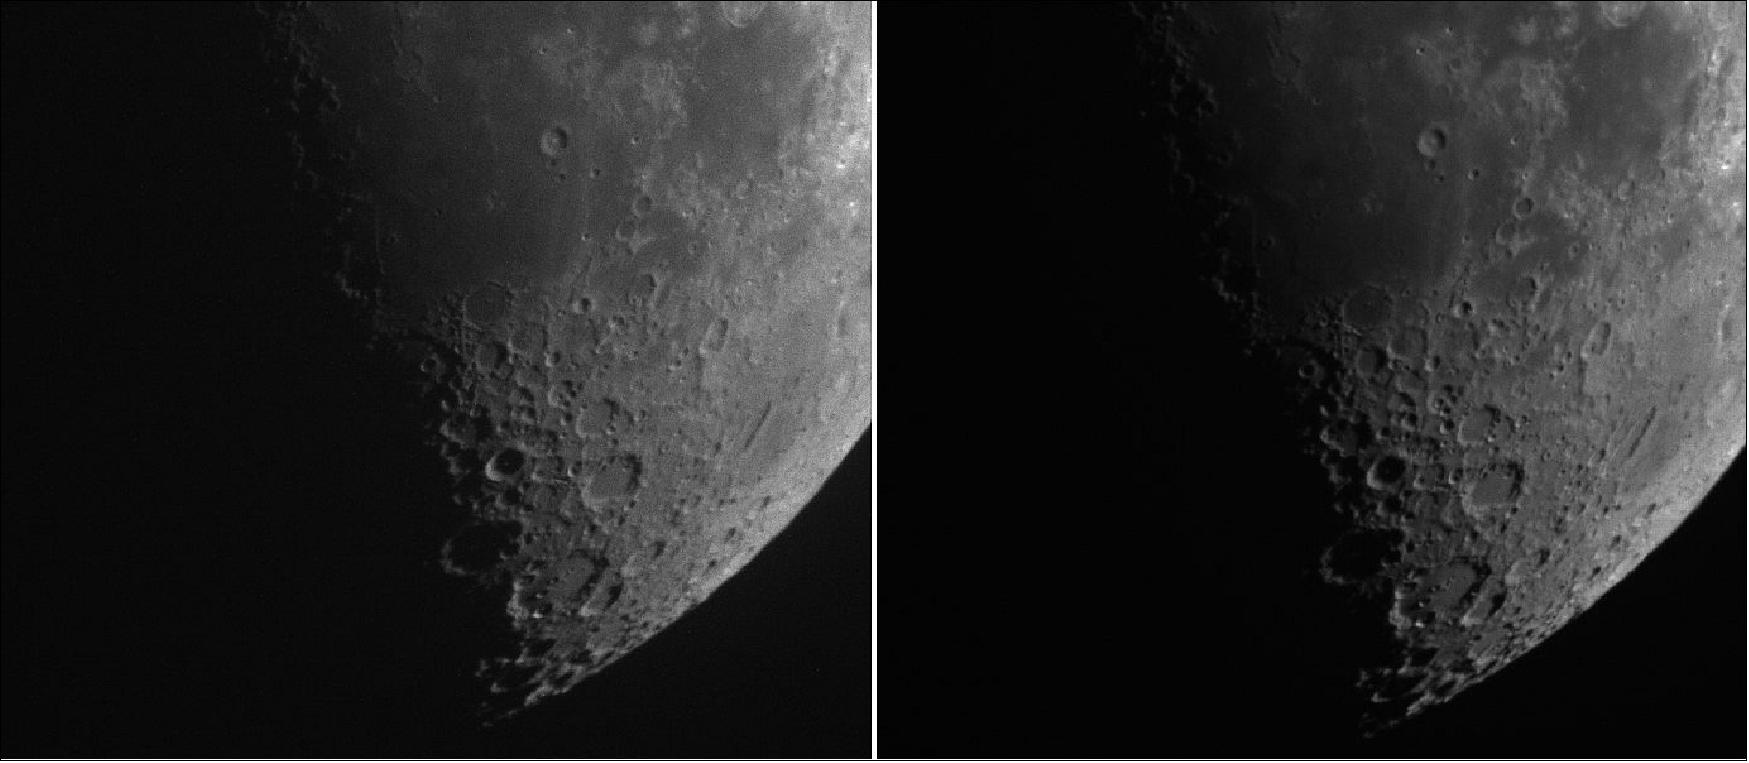 Figure 1: On June 27th, 2016, first light images of the Moon were obtained through the PFI with the cameras (image credit: NOA, ESA)